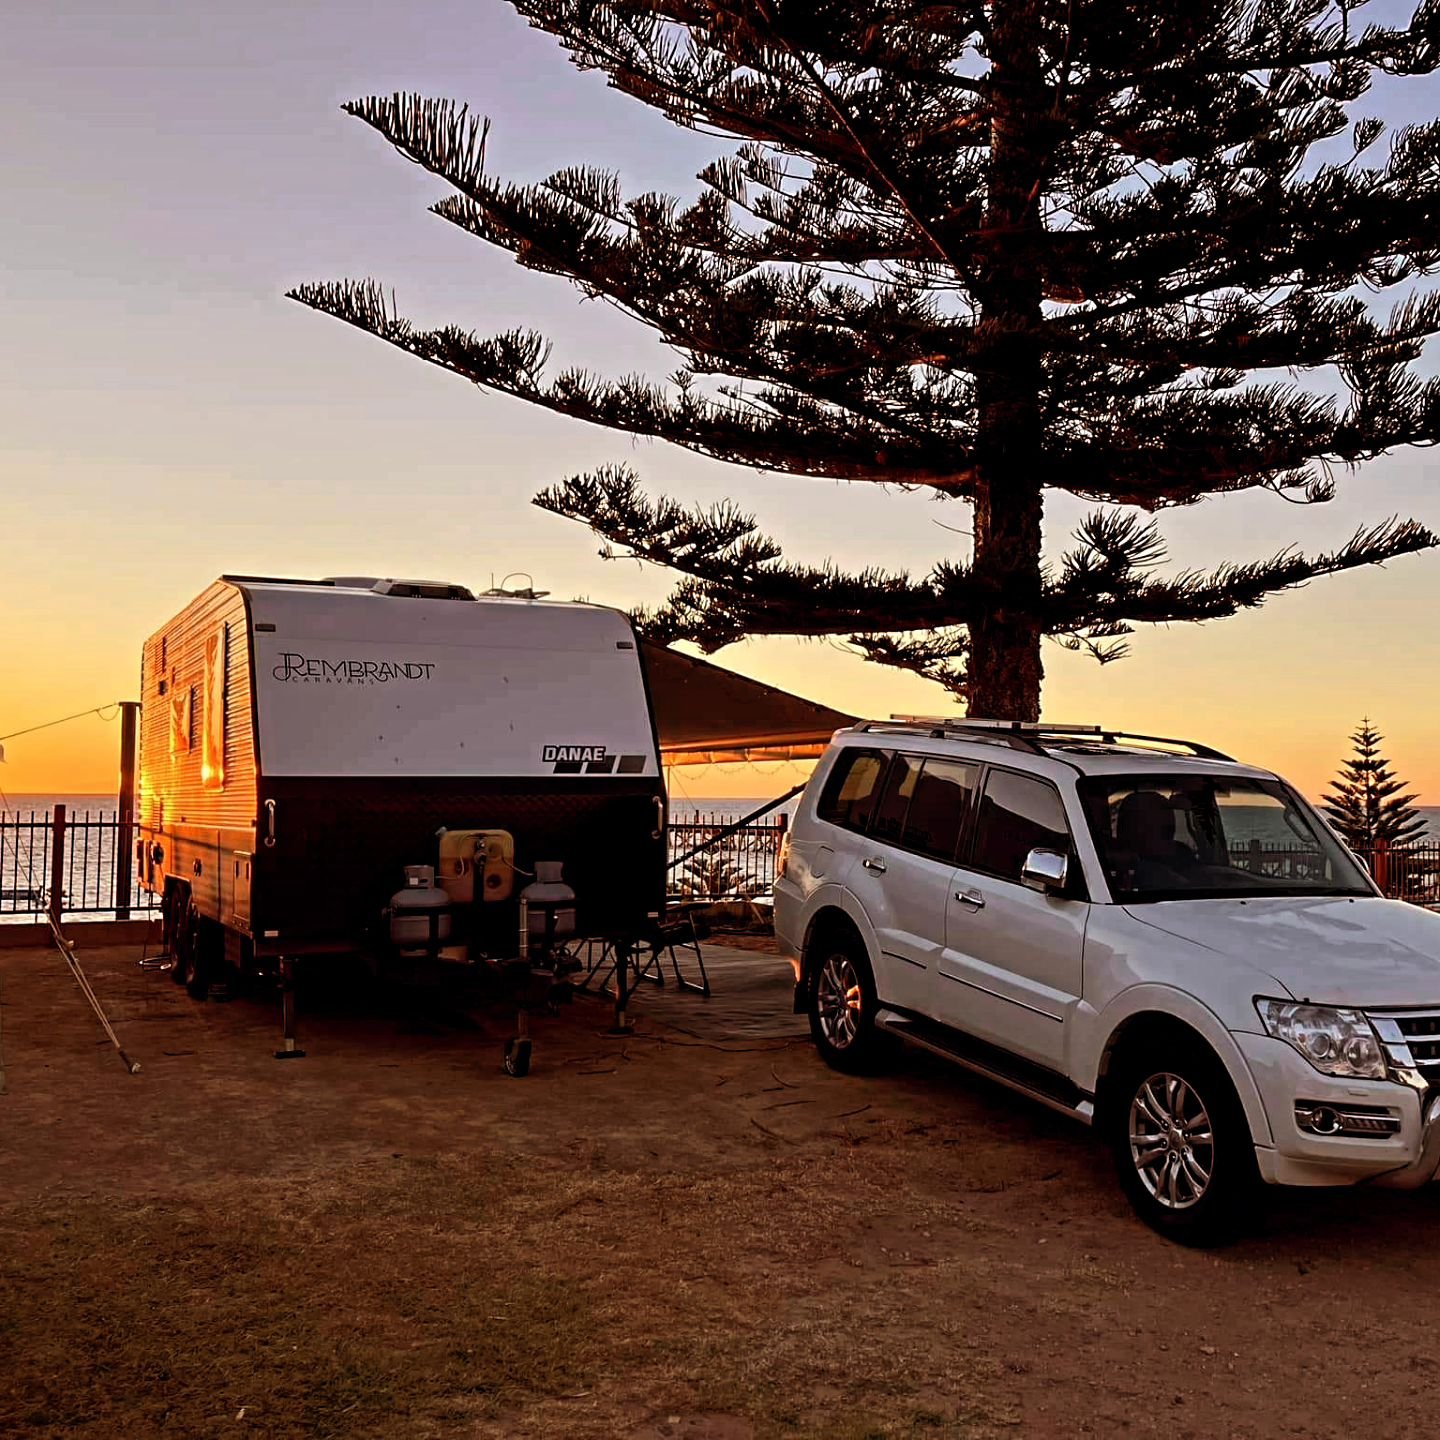 We love seeing our happy customers out and about using their Rembrandt Caravans. What an epic sunset by the water 🙌
.
.
#rembrandtcaravans 
#sunset 
#sunsetlovers 
#caravanlife 
#waterfrontcamping
#caravanpark 
#touringadventure 
#biglap 
#travellif